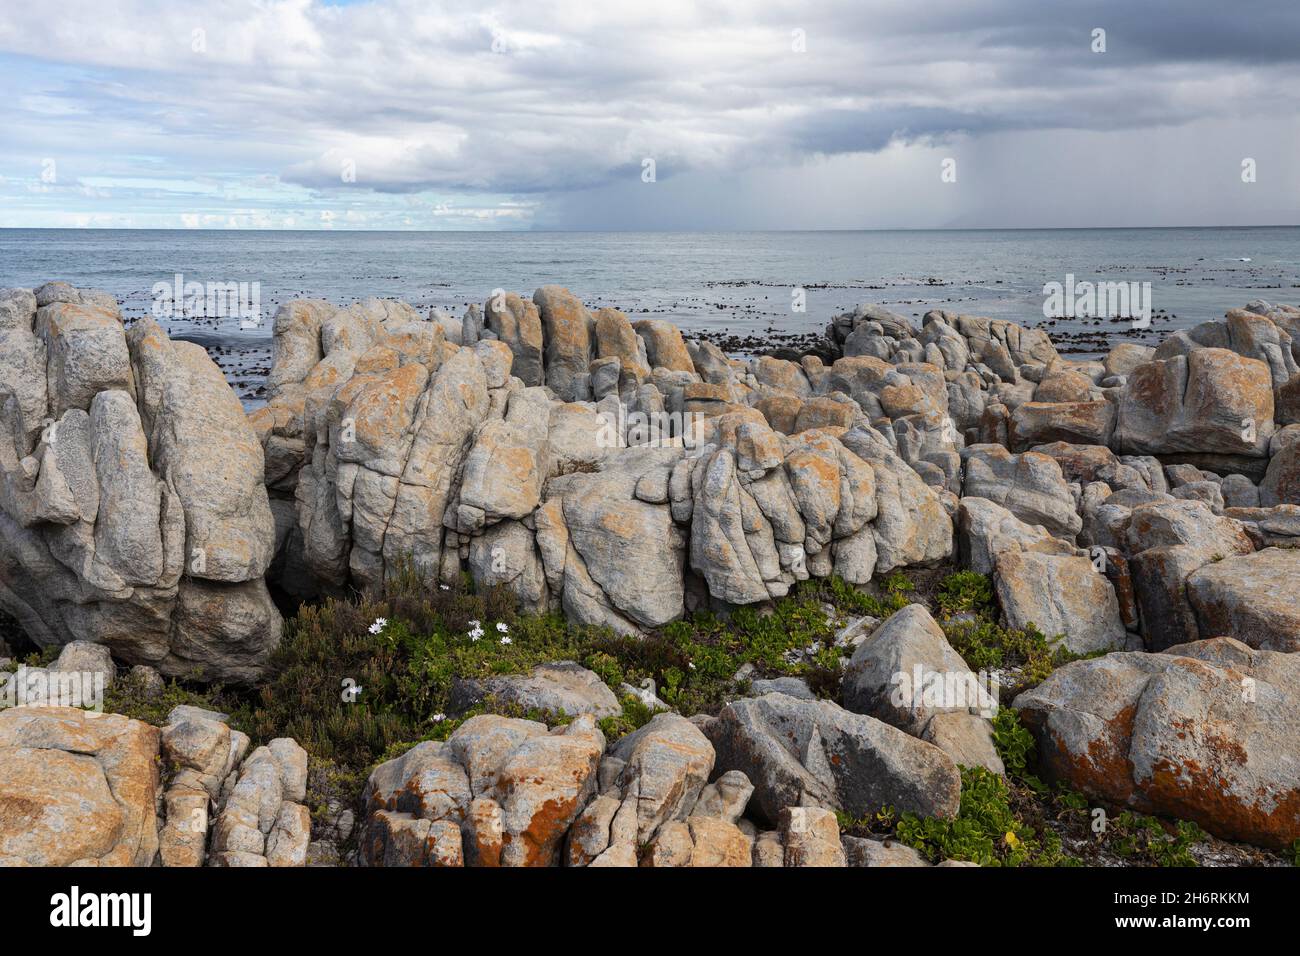 Rocky jagged coastline, eroded sandstone rock, view out to the ocean Stock Photo